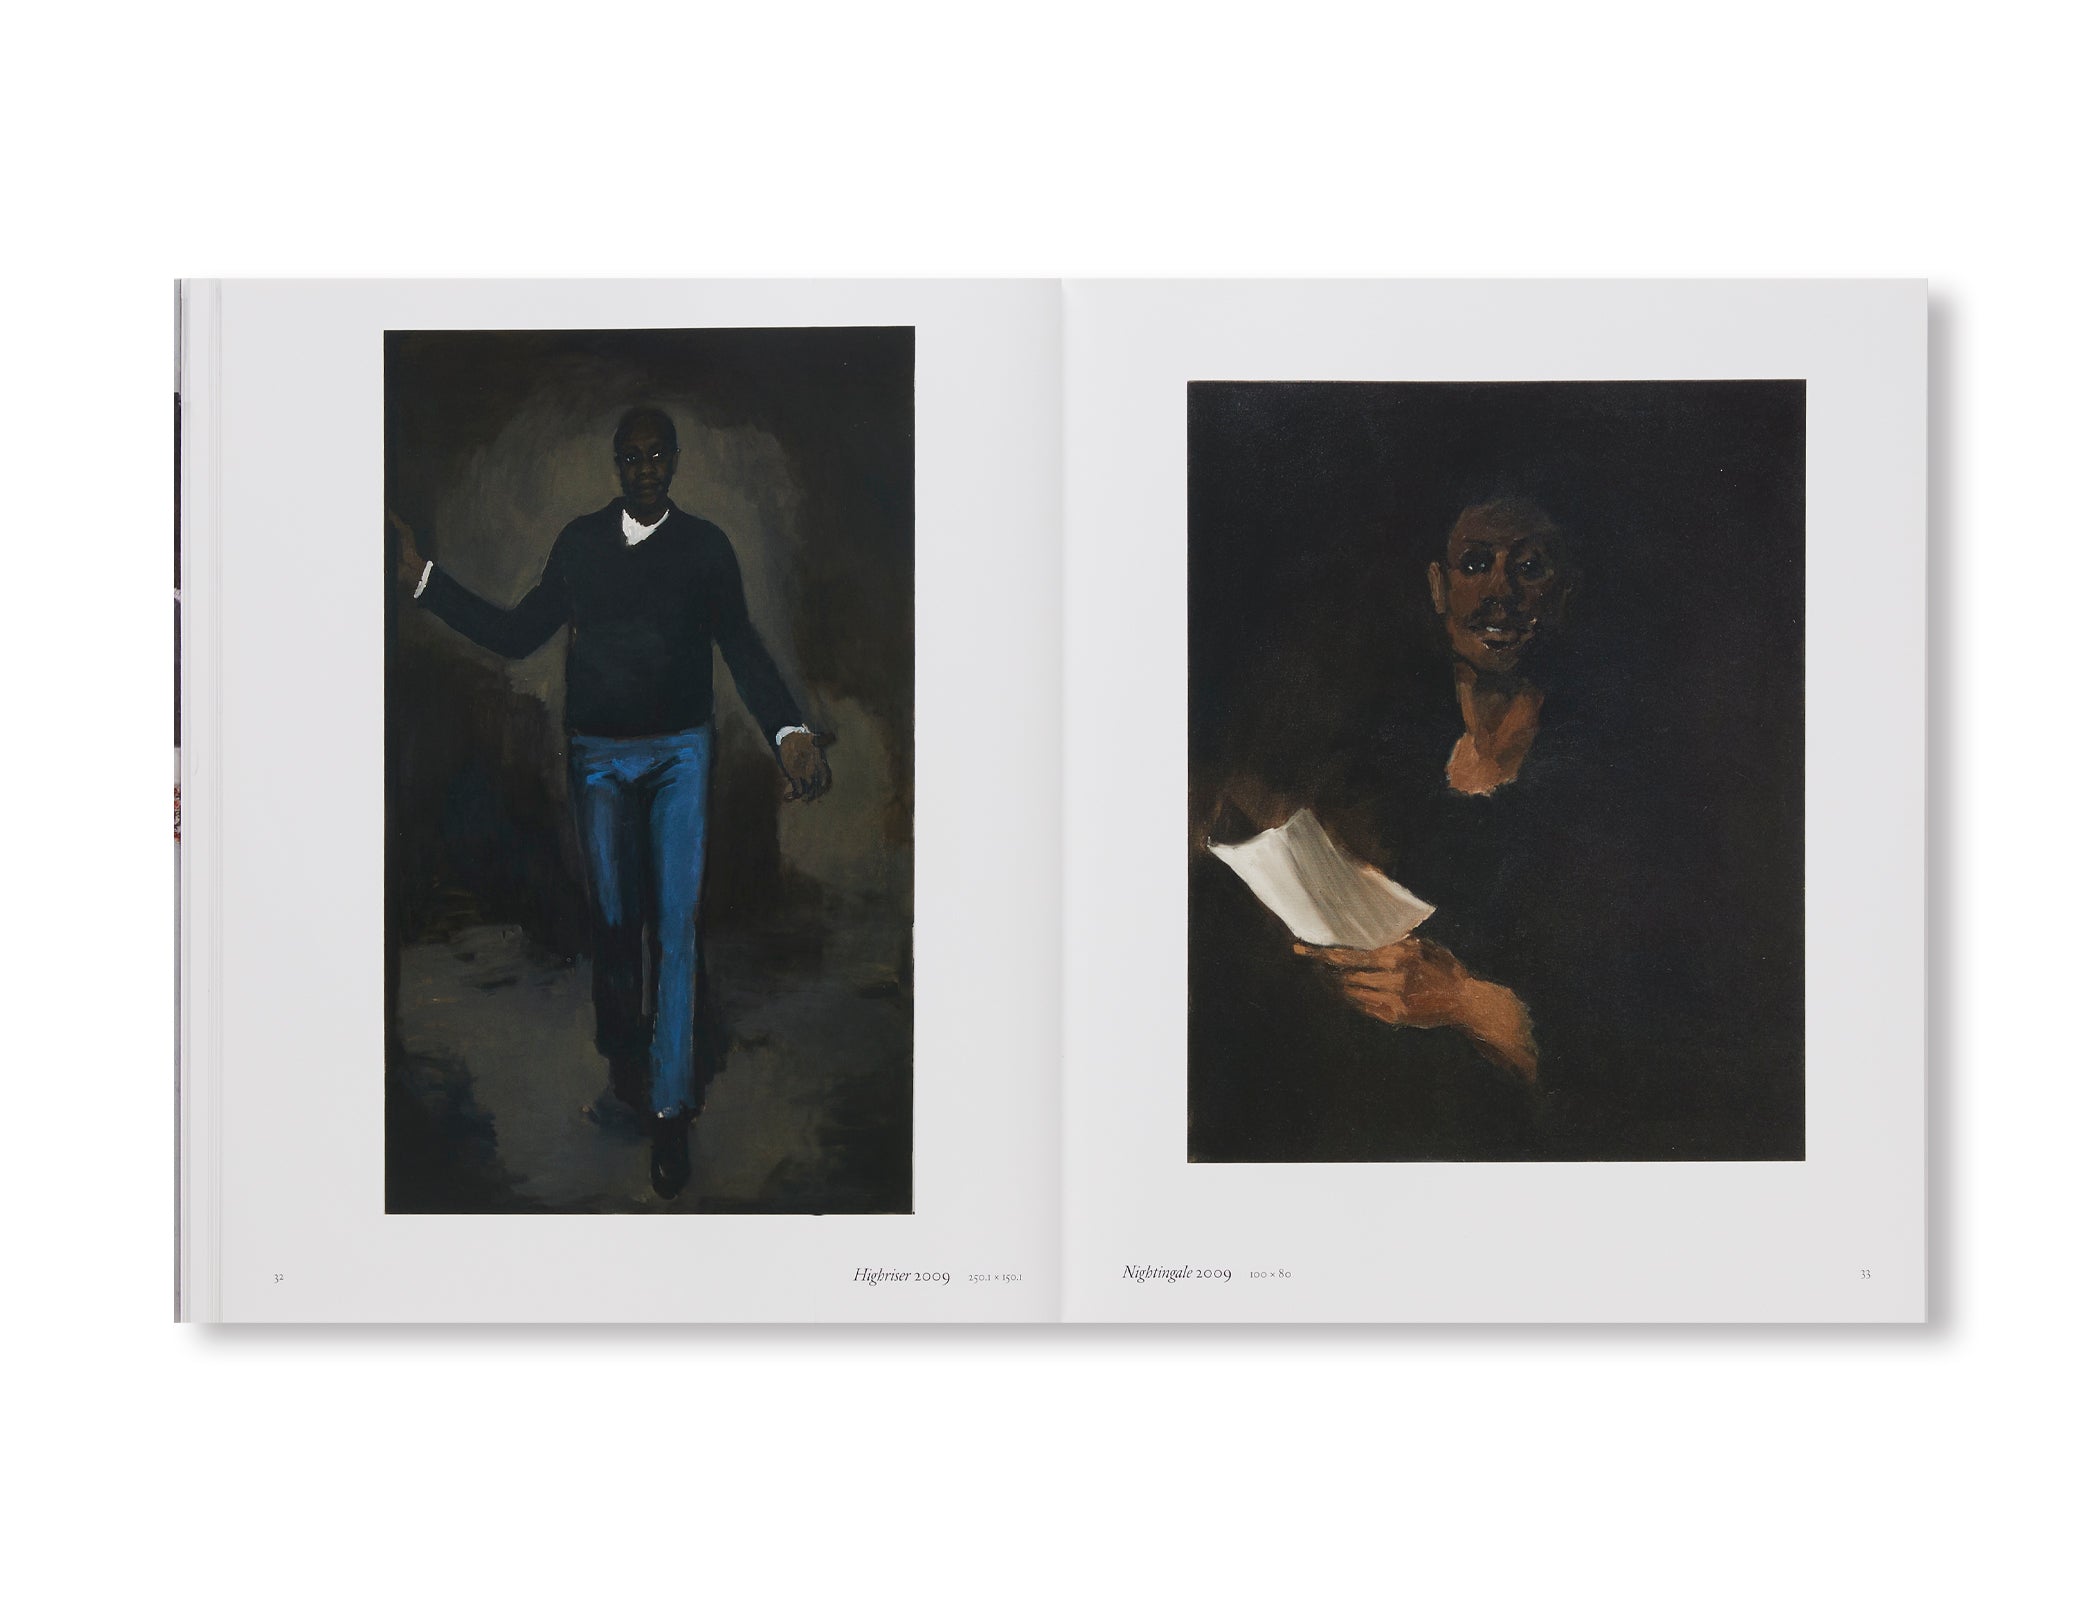 FLY IN LEAGUE WITH THE NIGHT by Lynette Yiadom-Boakye